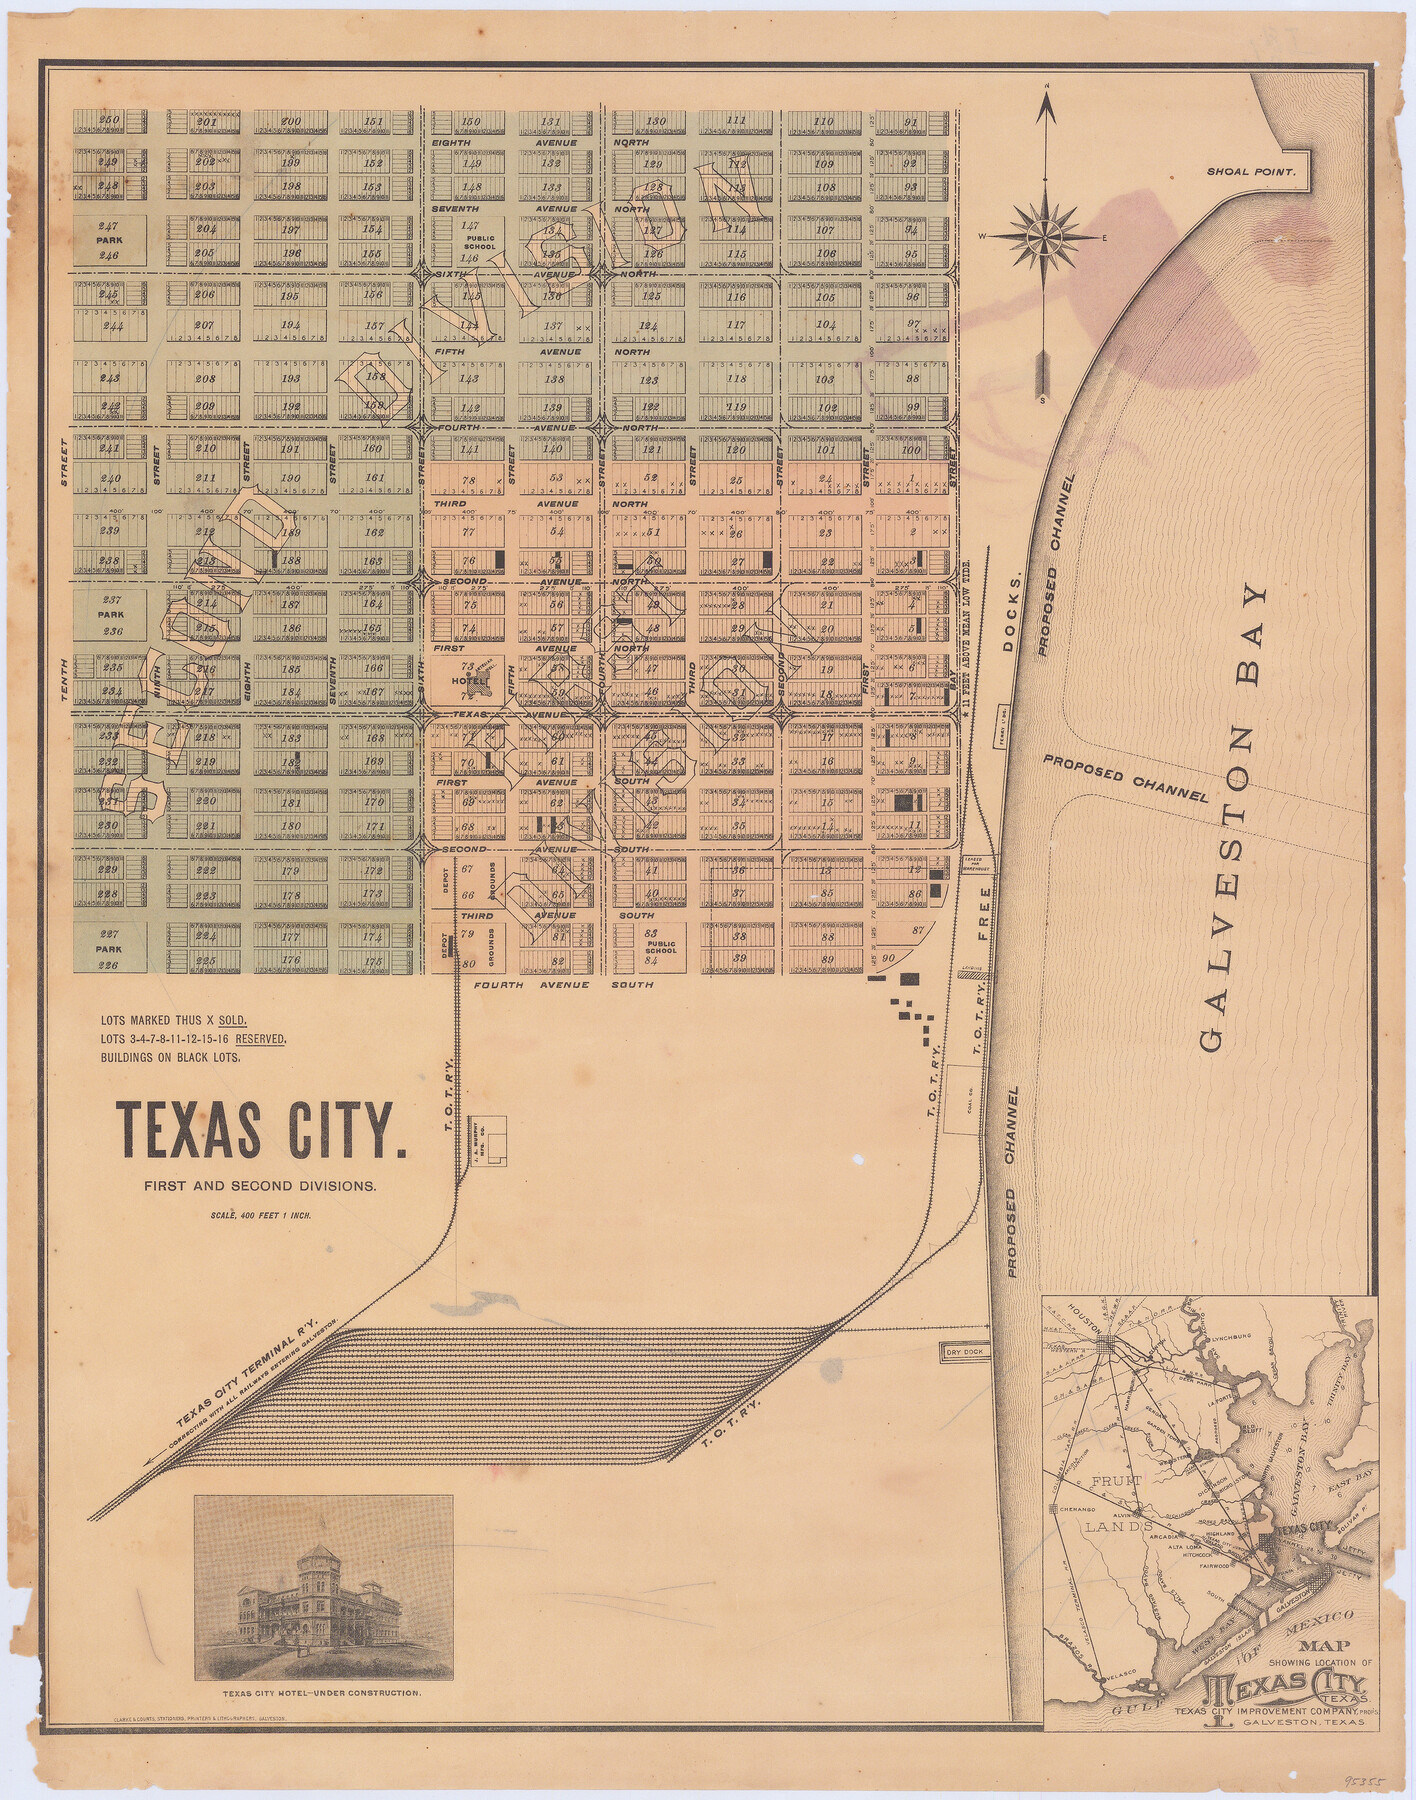 95355, Texas City. First and Second Division, General Map Collection